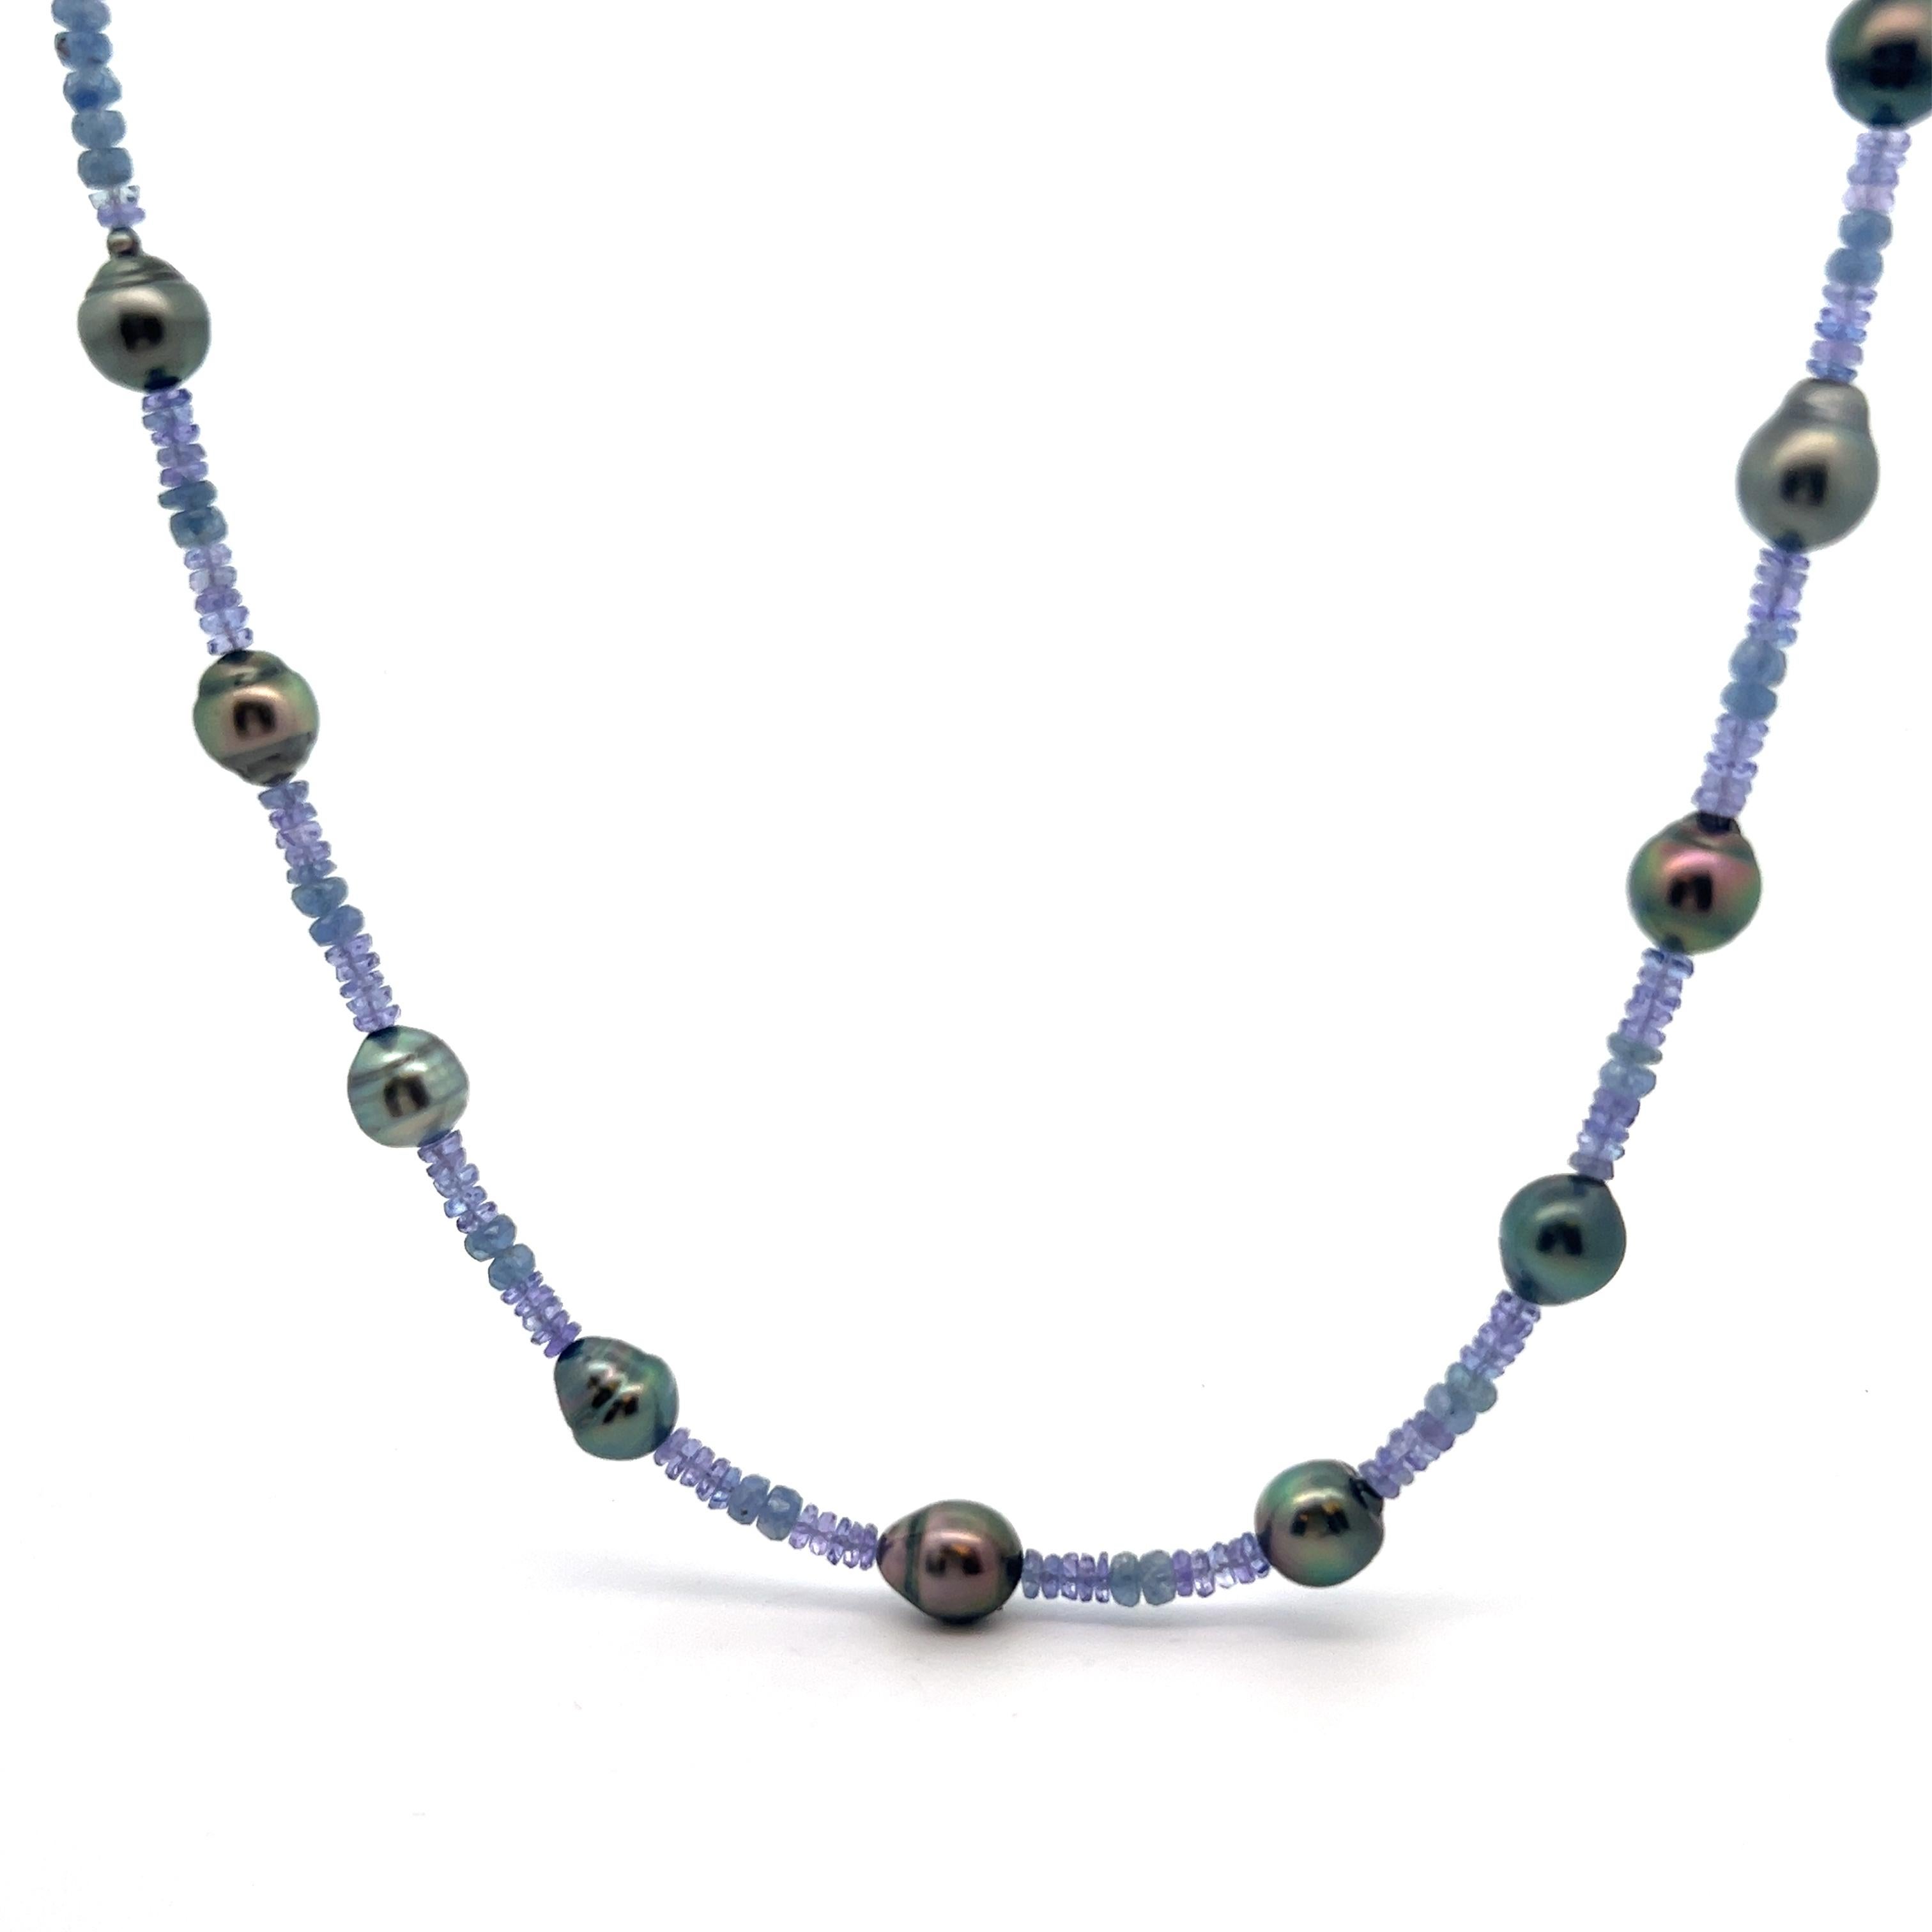 Tanzanite Sapphire Beads Tahitian Baroque Black Pearls Sterling Silver Necklace For Sale 1